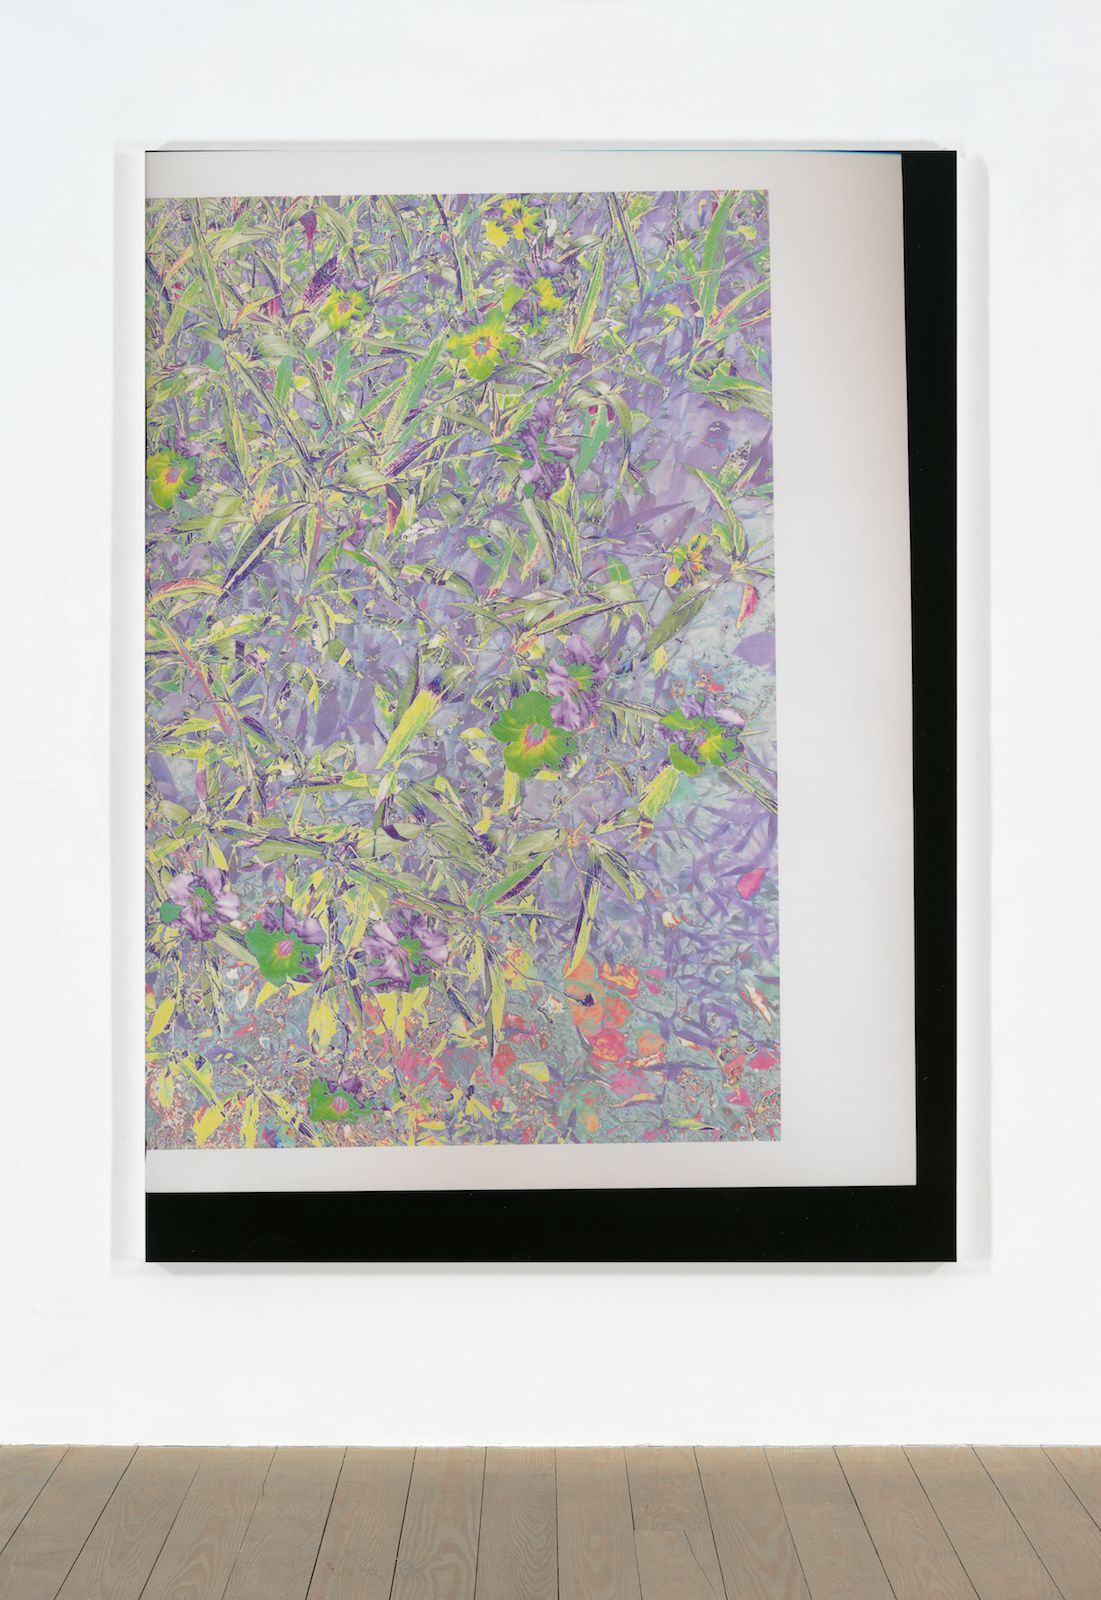 Travess Smalley, Untitled (Feb_24_2015_Floral_LuluBook_Scan 10), 2015, UV coated digital pigment print mounted on aluminum frame, 81 1⁄2  × 59 1⁄2  × 1 1⁄2  in. ( 207.01  × 151.13  × 3.81  cm)